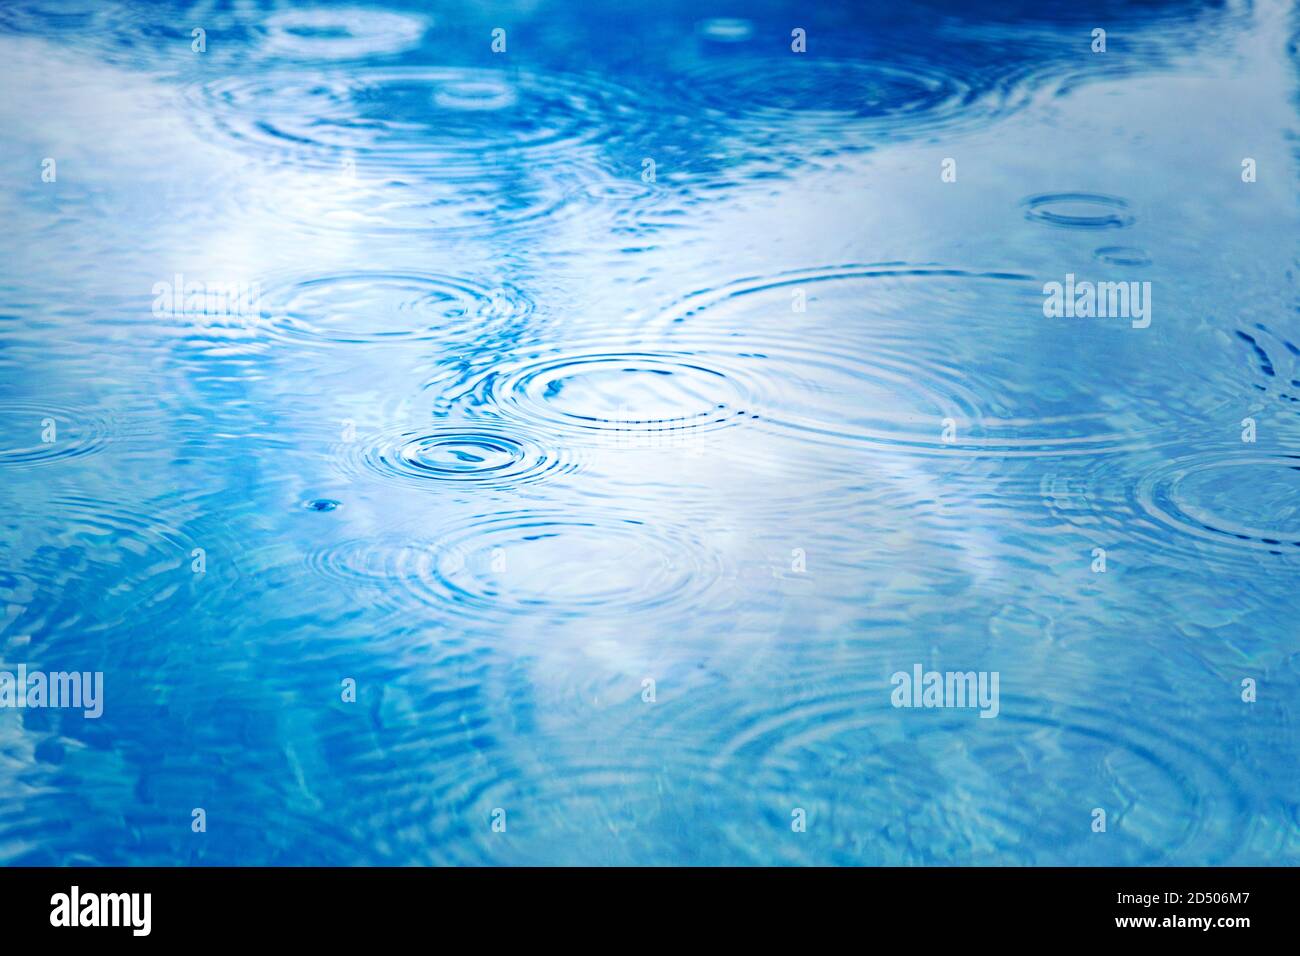 Raindrops on pool blue water surface. blue water texture as background. Stains circles on the water from rain Stock Photo